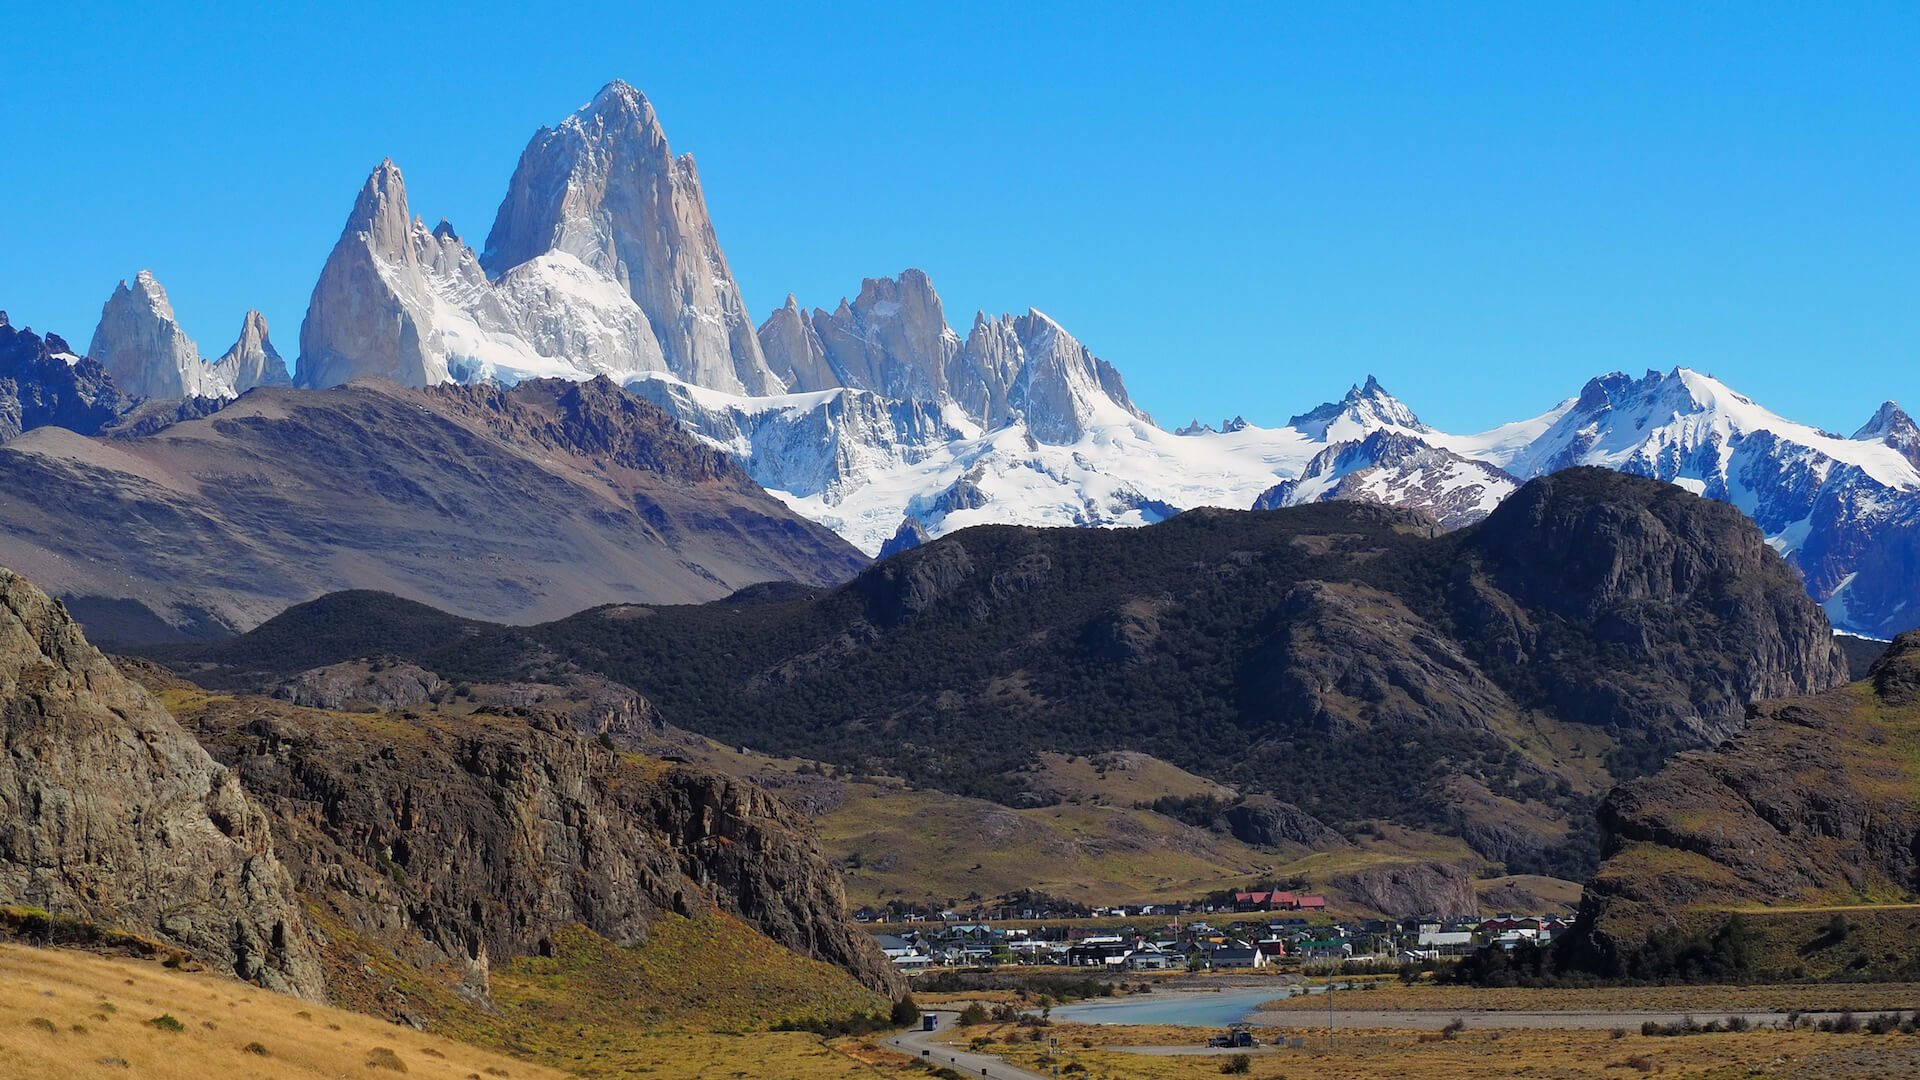 The town of El Chalten sits in the shadow of Mount Fitz Roy